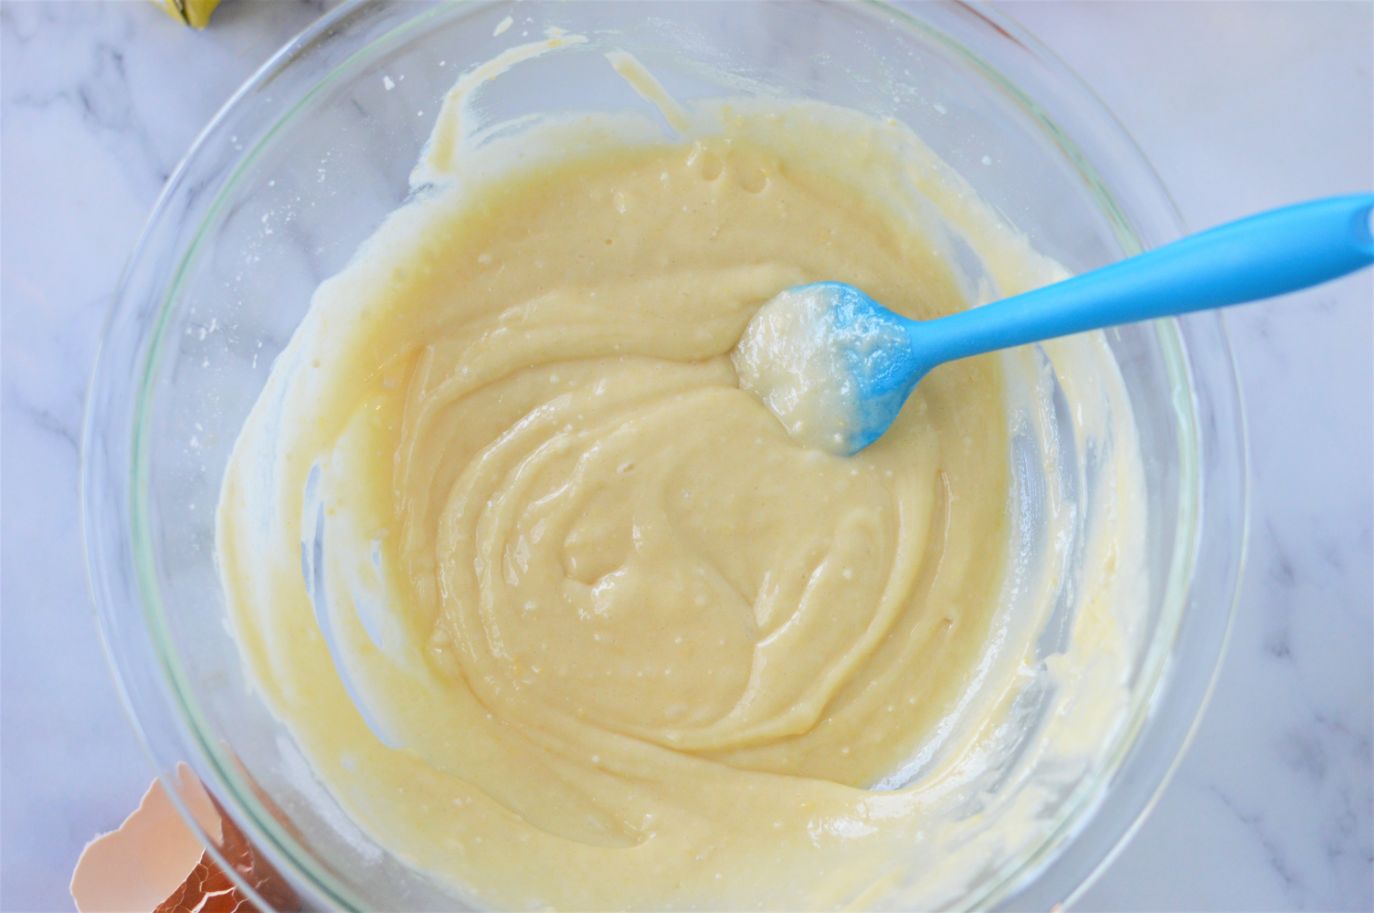 A large glass bowl full of pancake mix muffin batter being stirred by a blue silicone spatula